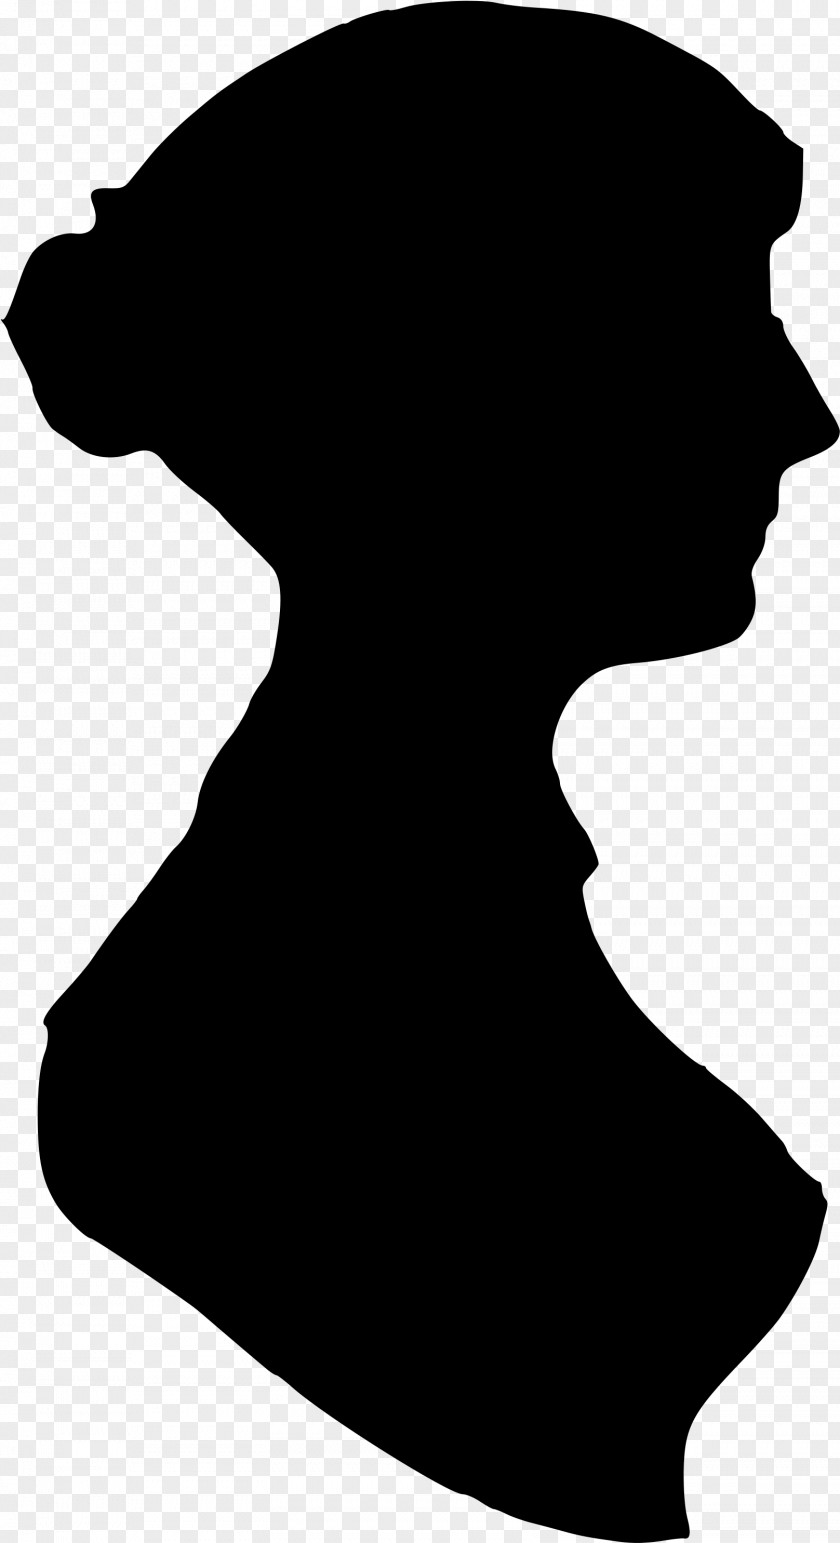 Identity Theft Silhouette Pride And Prejudice Portrait Mansfield Park Image PNG